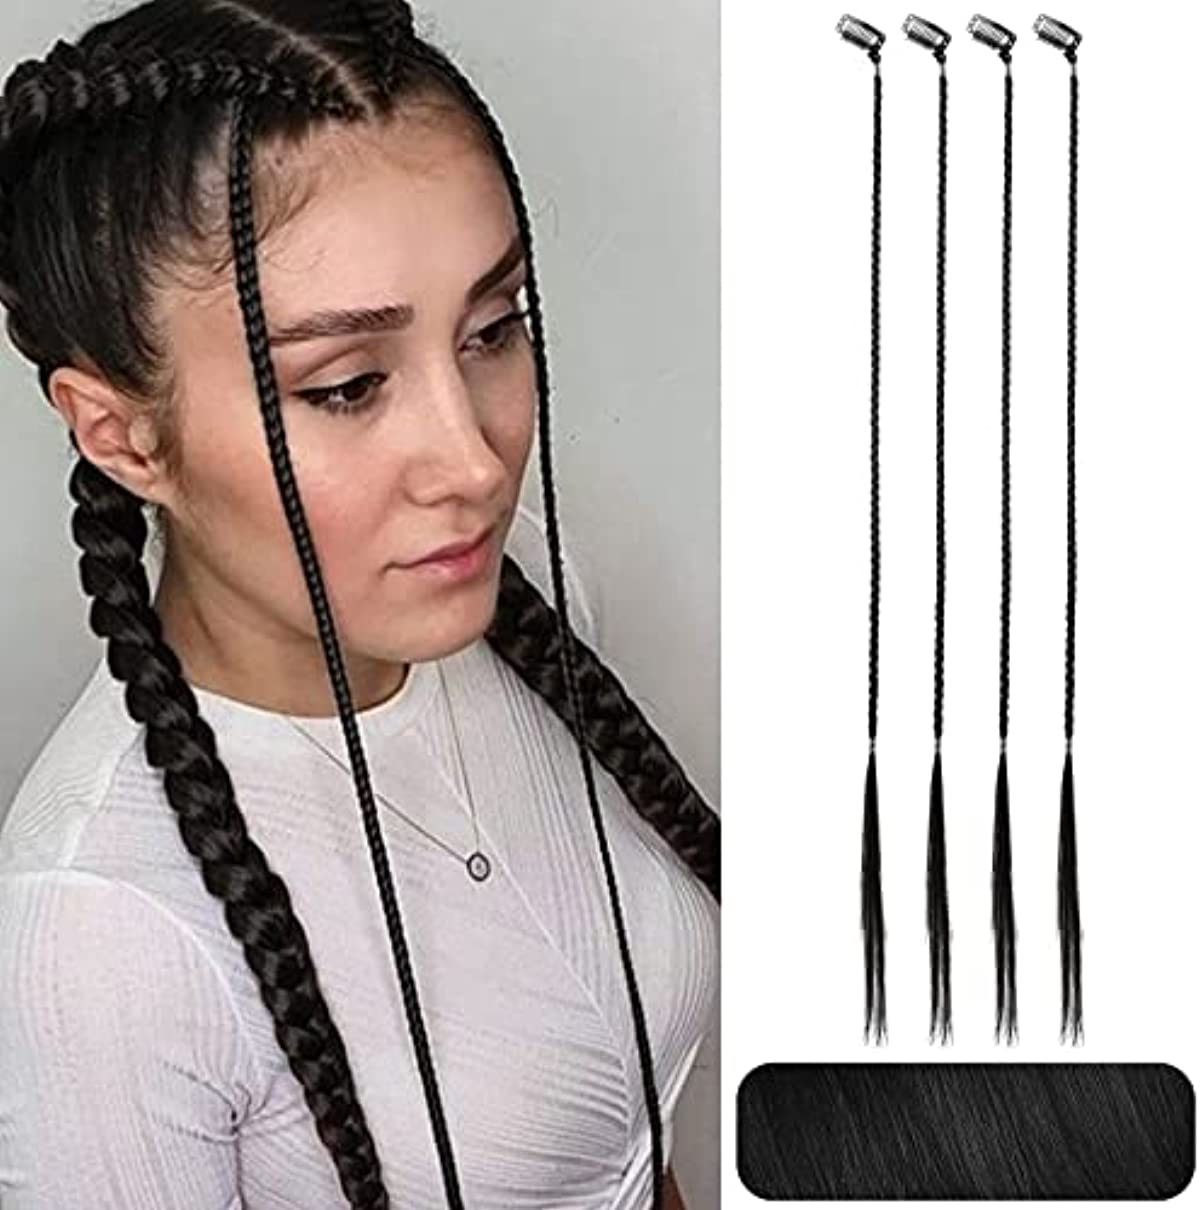 Braid Hair Extensions, 4 PCS Baby Braids Front Side Bang Clip in Hair Extensions Long Braided HairPiece Natural Soft Synthetic Hair for Women Daily Wear 20 Inch Black